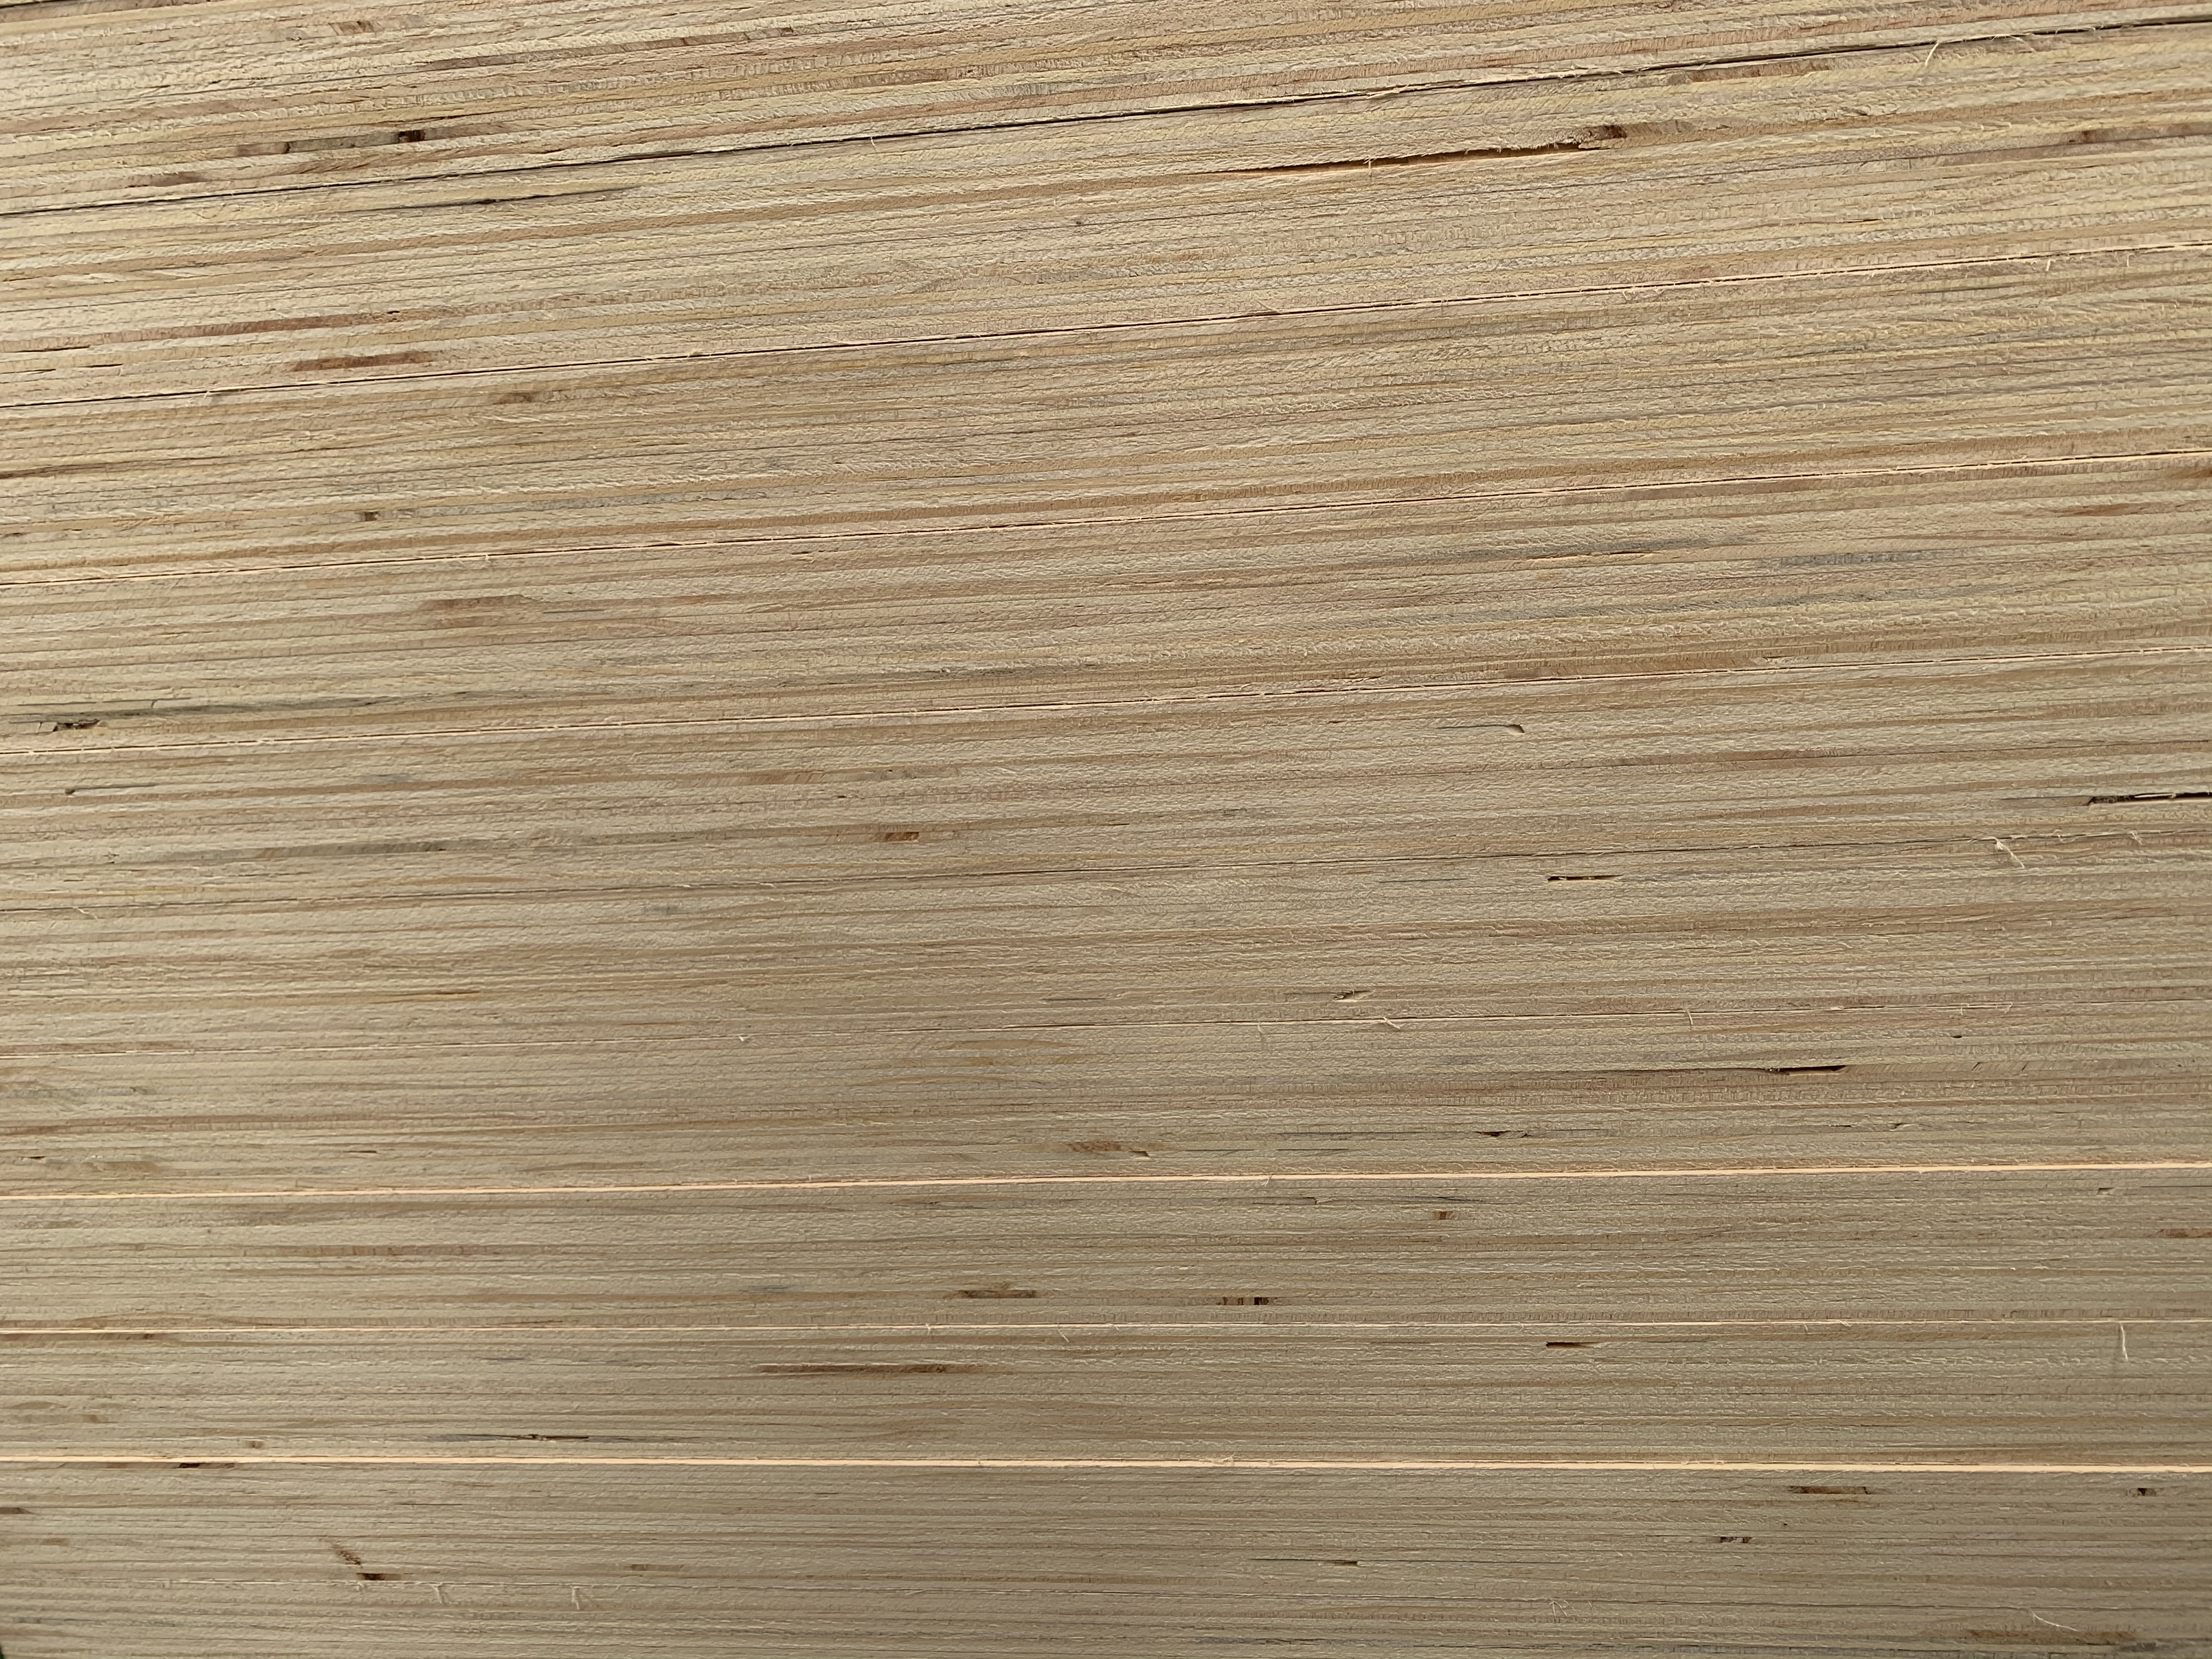 India Plywood Market Size To Hit INR 306.5 Billion By FY 2028-29 | Industry CAGR 6.74%